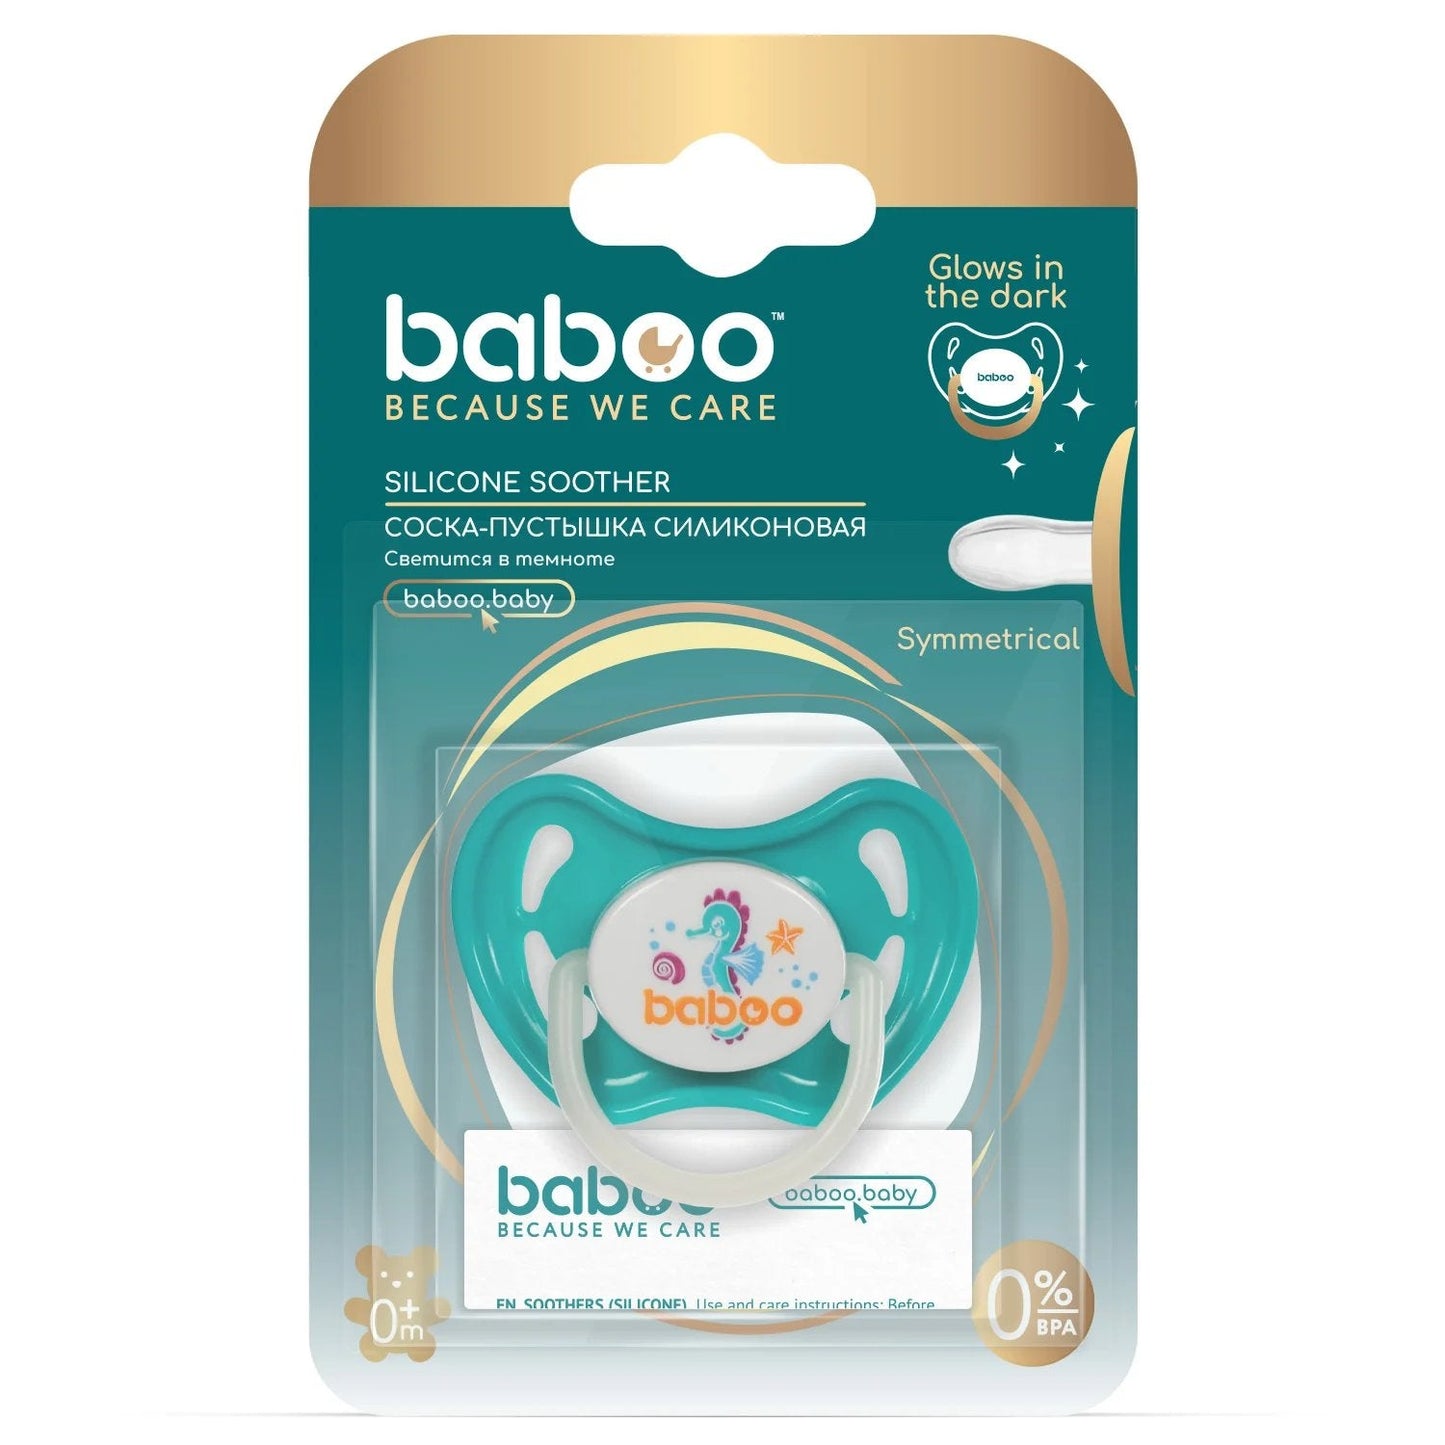 Infant pacifier in sealife design, made of high-quality medical silicone, with protective cap and improved air vents, suitable for babies from birth